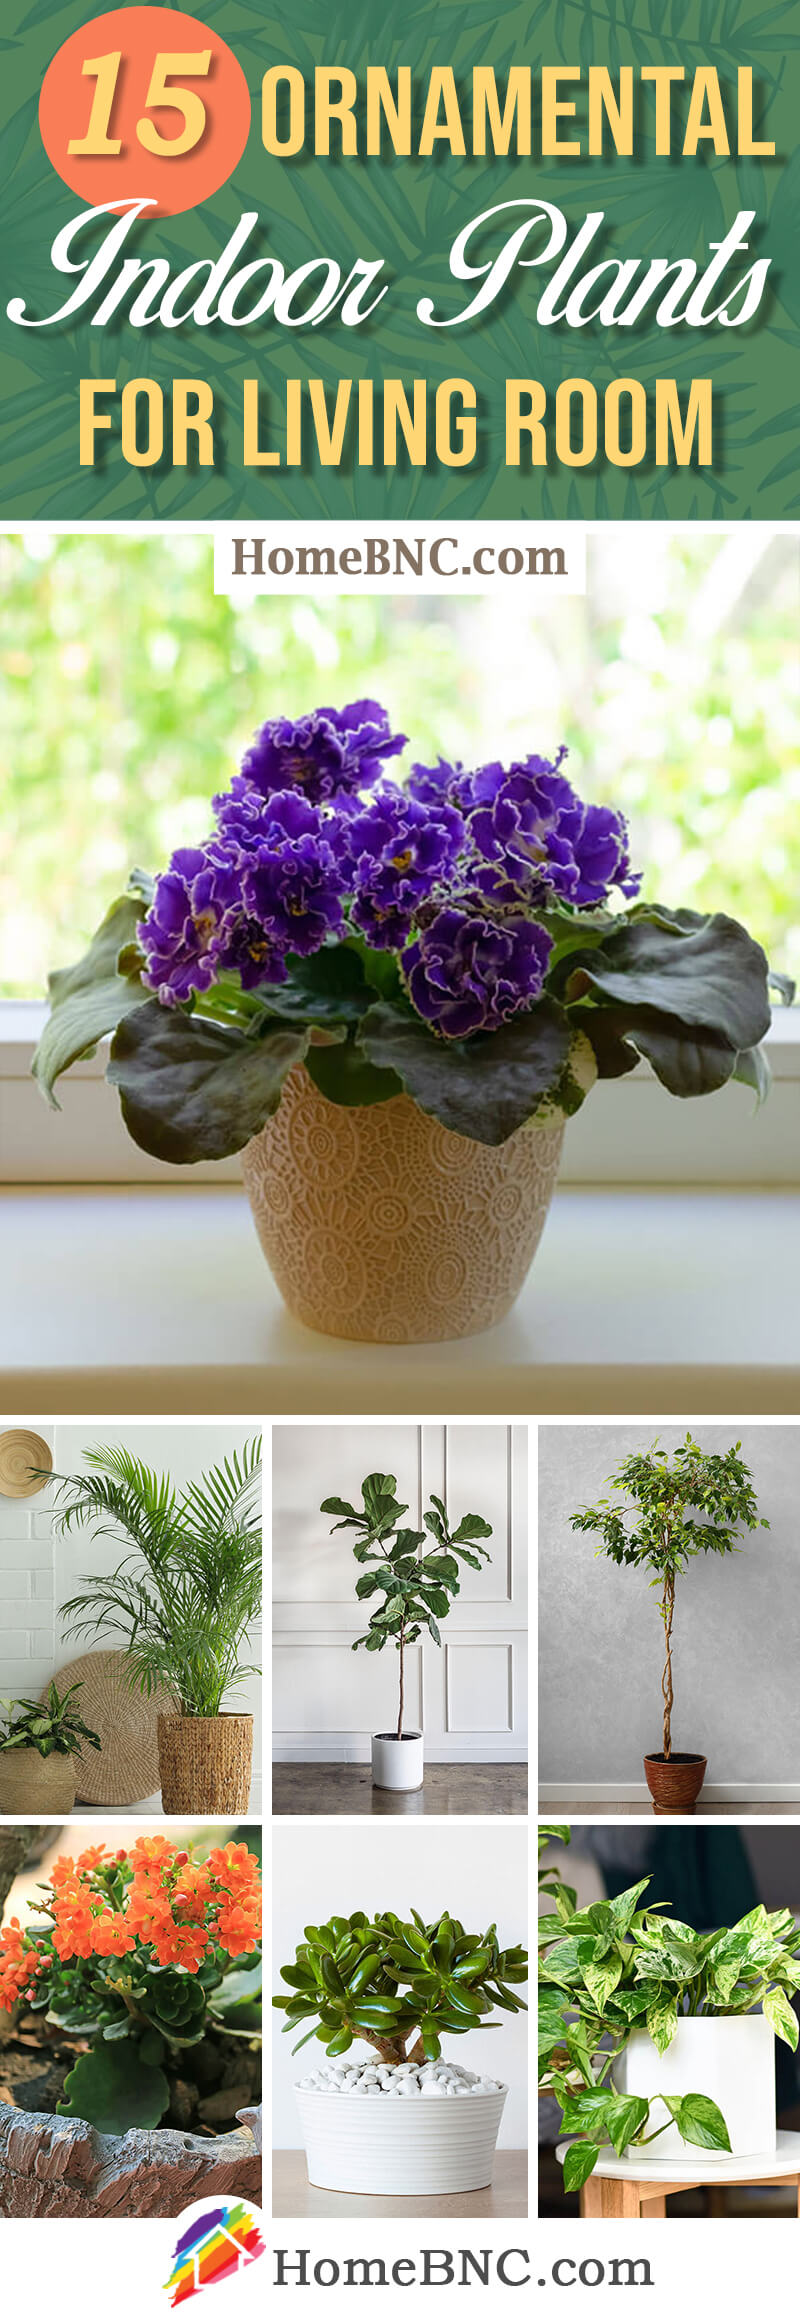 Indoors Plants for Living Room